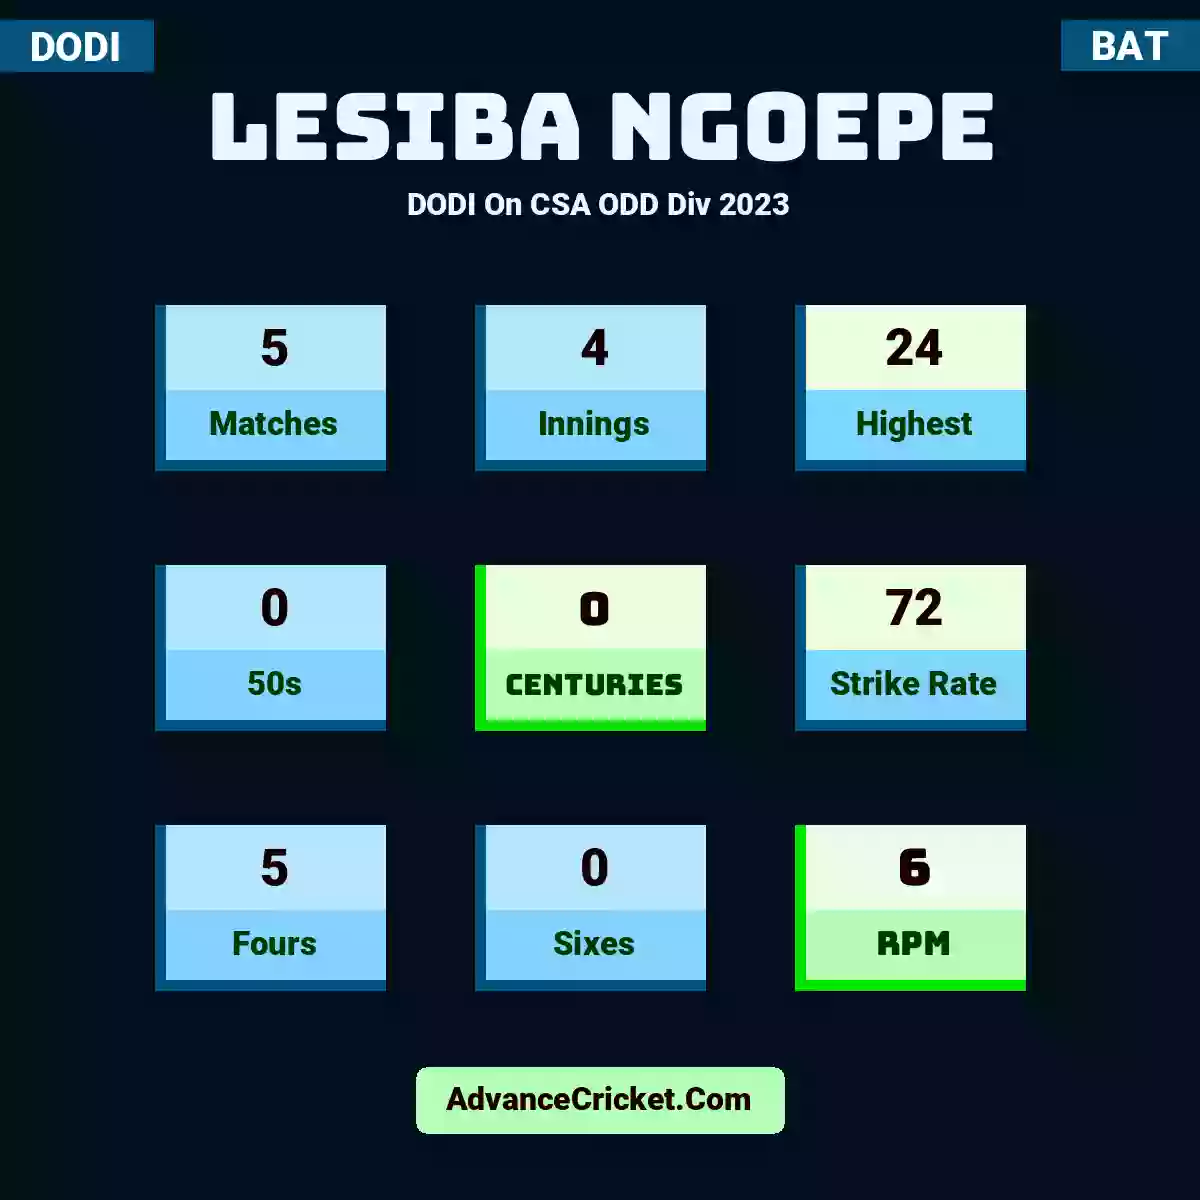 Lesiba Ngoepe DODI  On CSA ODD Div 2023, Lesiba Ngoepe played 5 matches, scored 24 runs as highest, 0 half-centuries, and 0 centuries, with a strike rate of 72. L.Ngoepe hit 5 fours and 0 sixes, with an RPM of 6.